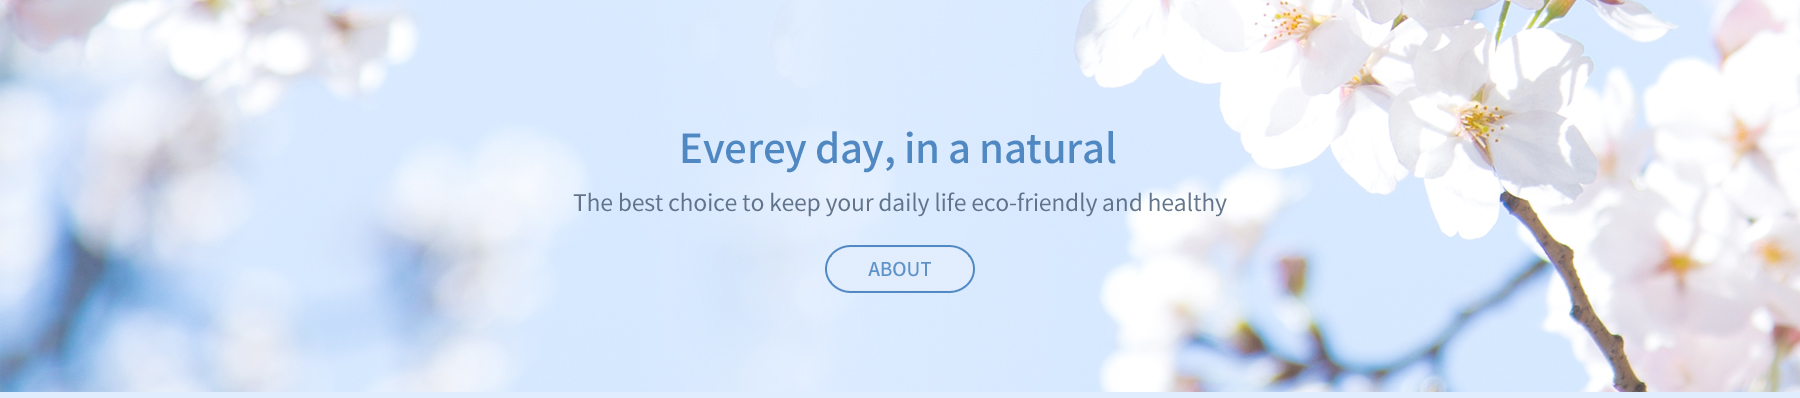 Everey day, in a natural. The best choice to keep your daily life eco-friendly and healthy. 에코스타트 회사소개 바로가기